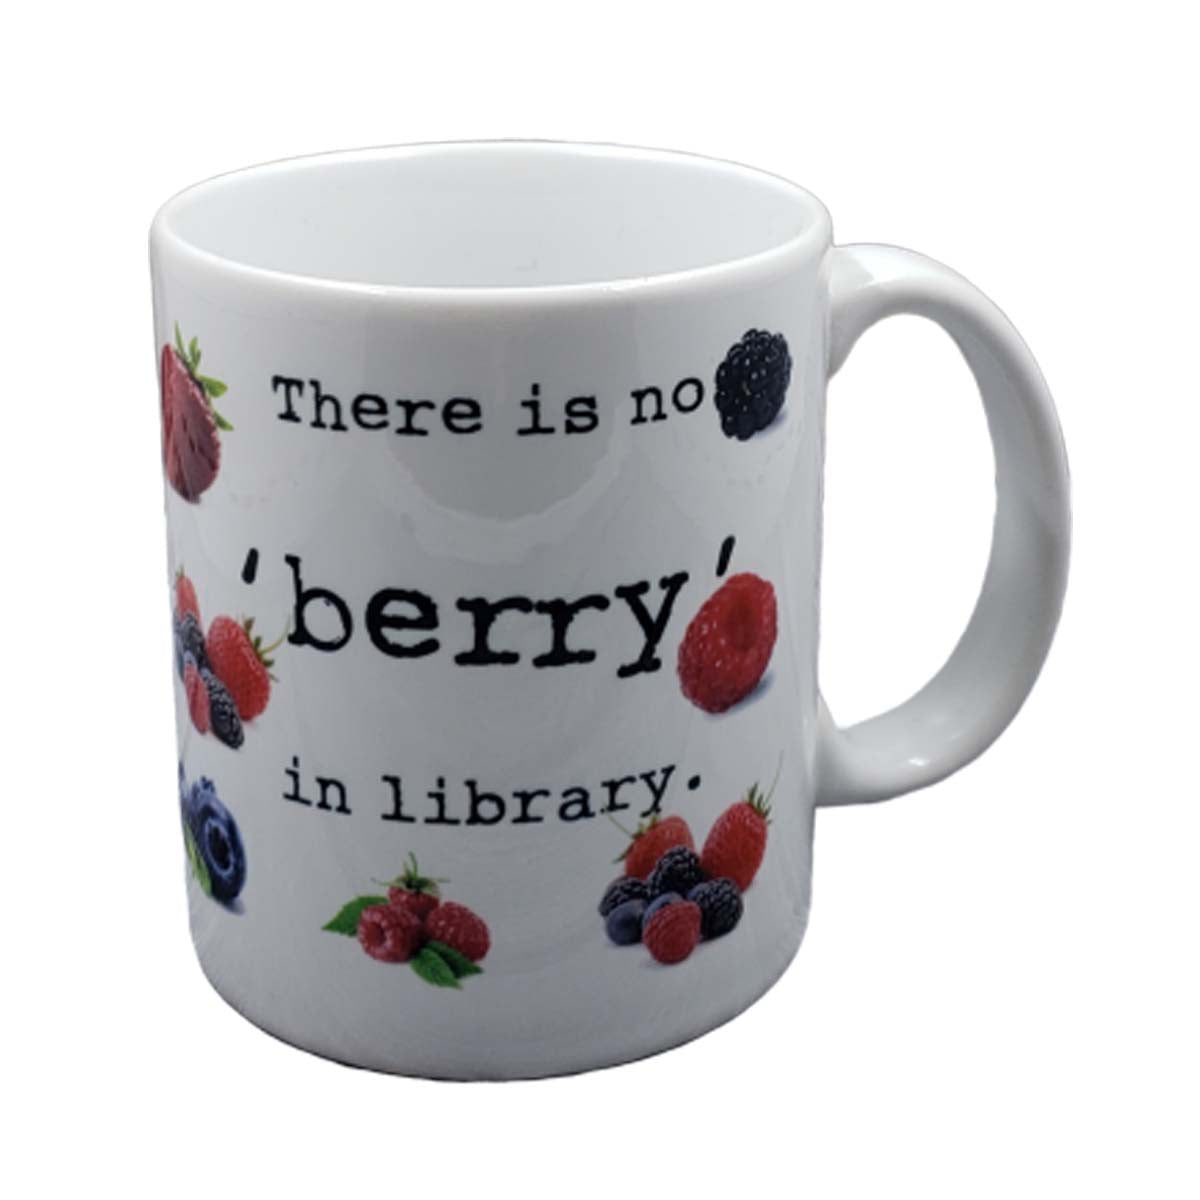 No Berry in Library Mug